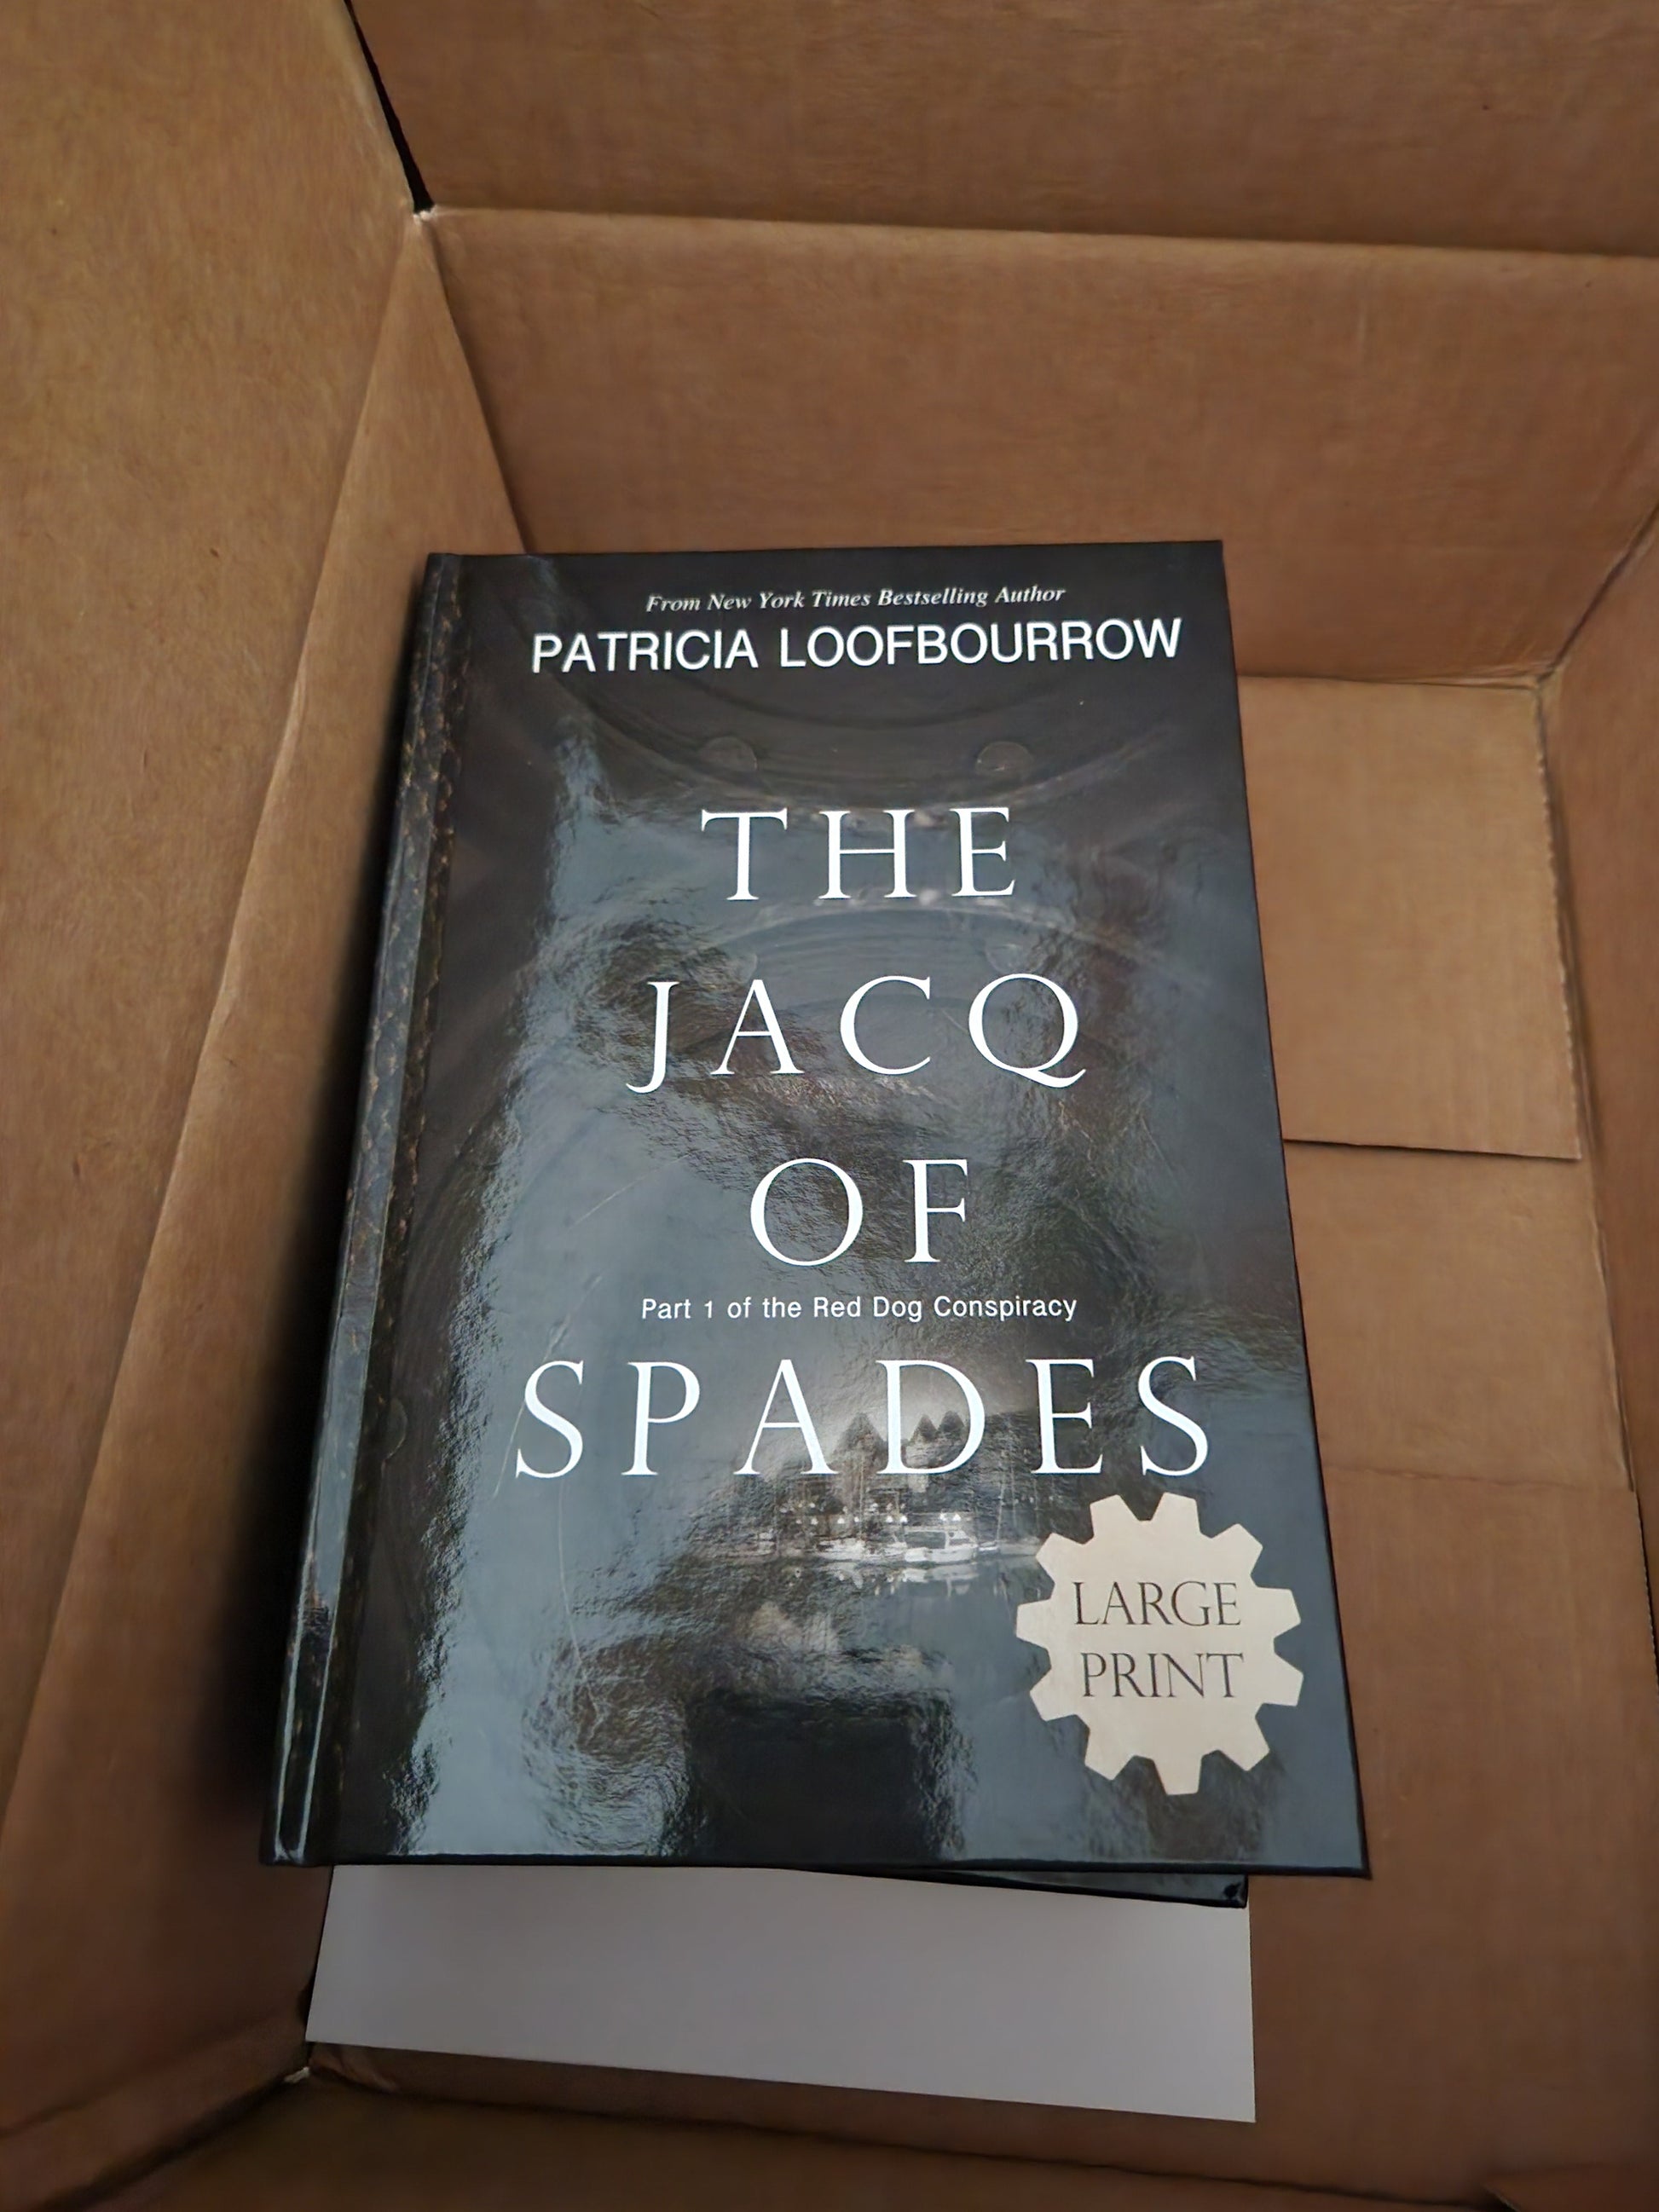 [LARGE PRINT] The Jacq of Spades (signed hardcover) - Patricia Loofbourrow